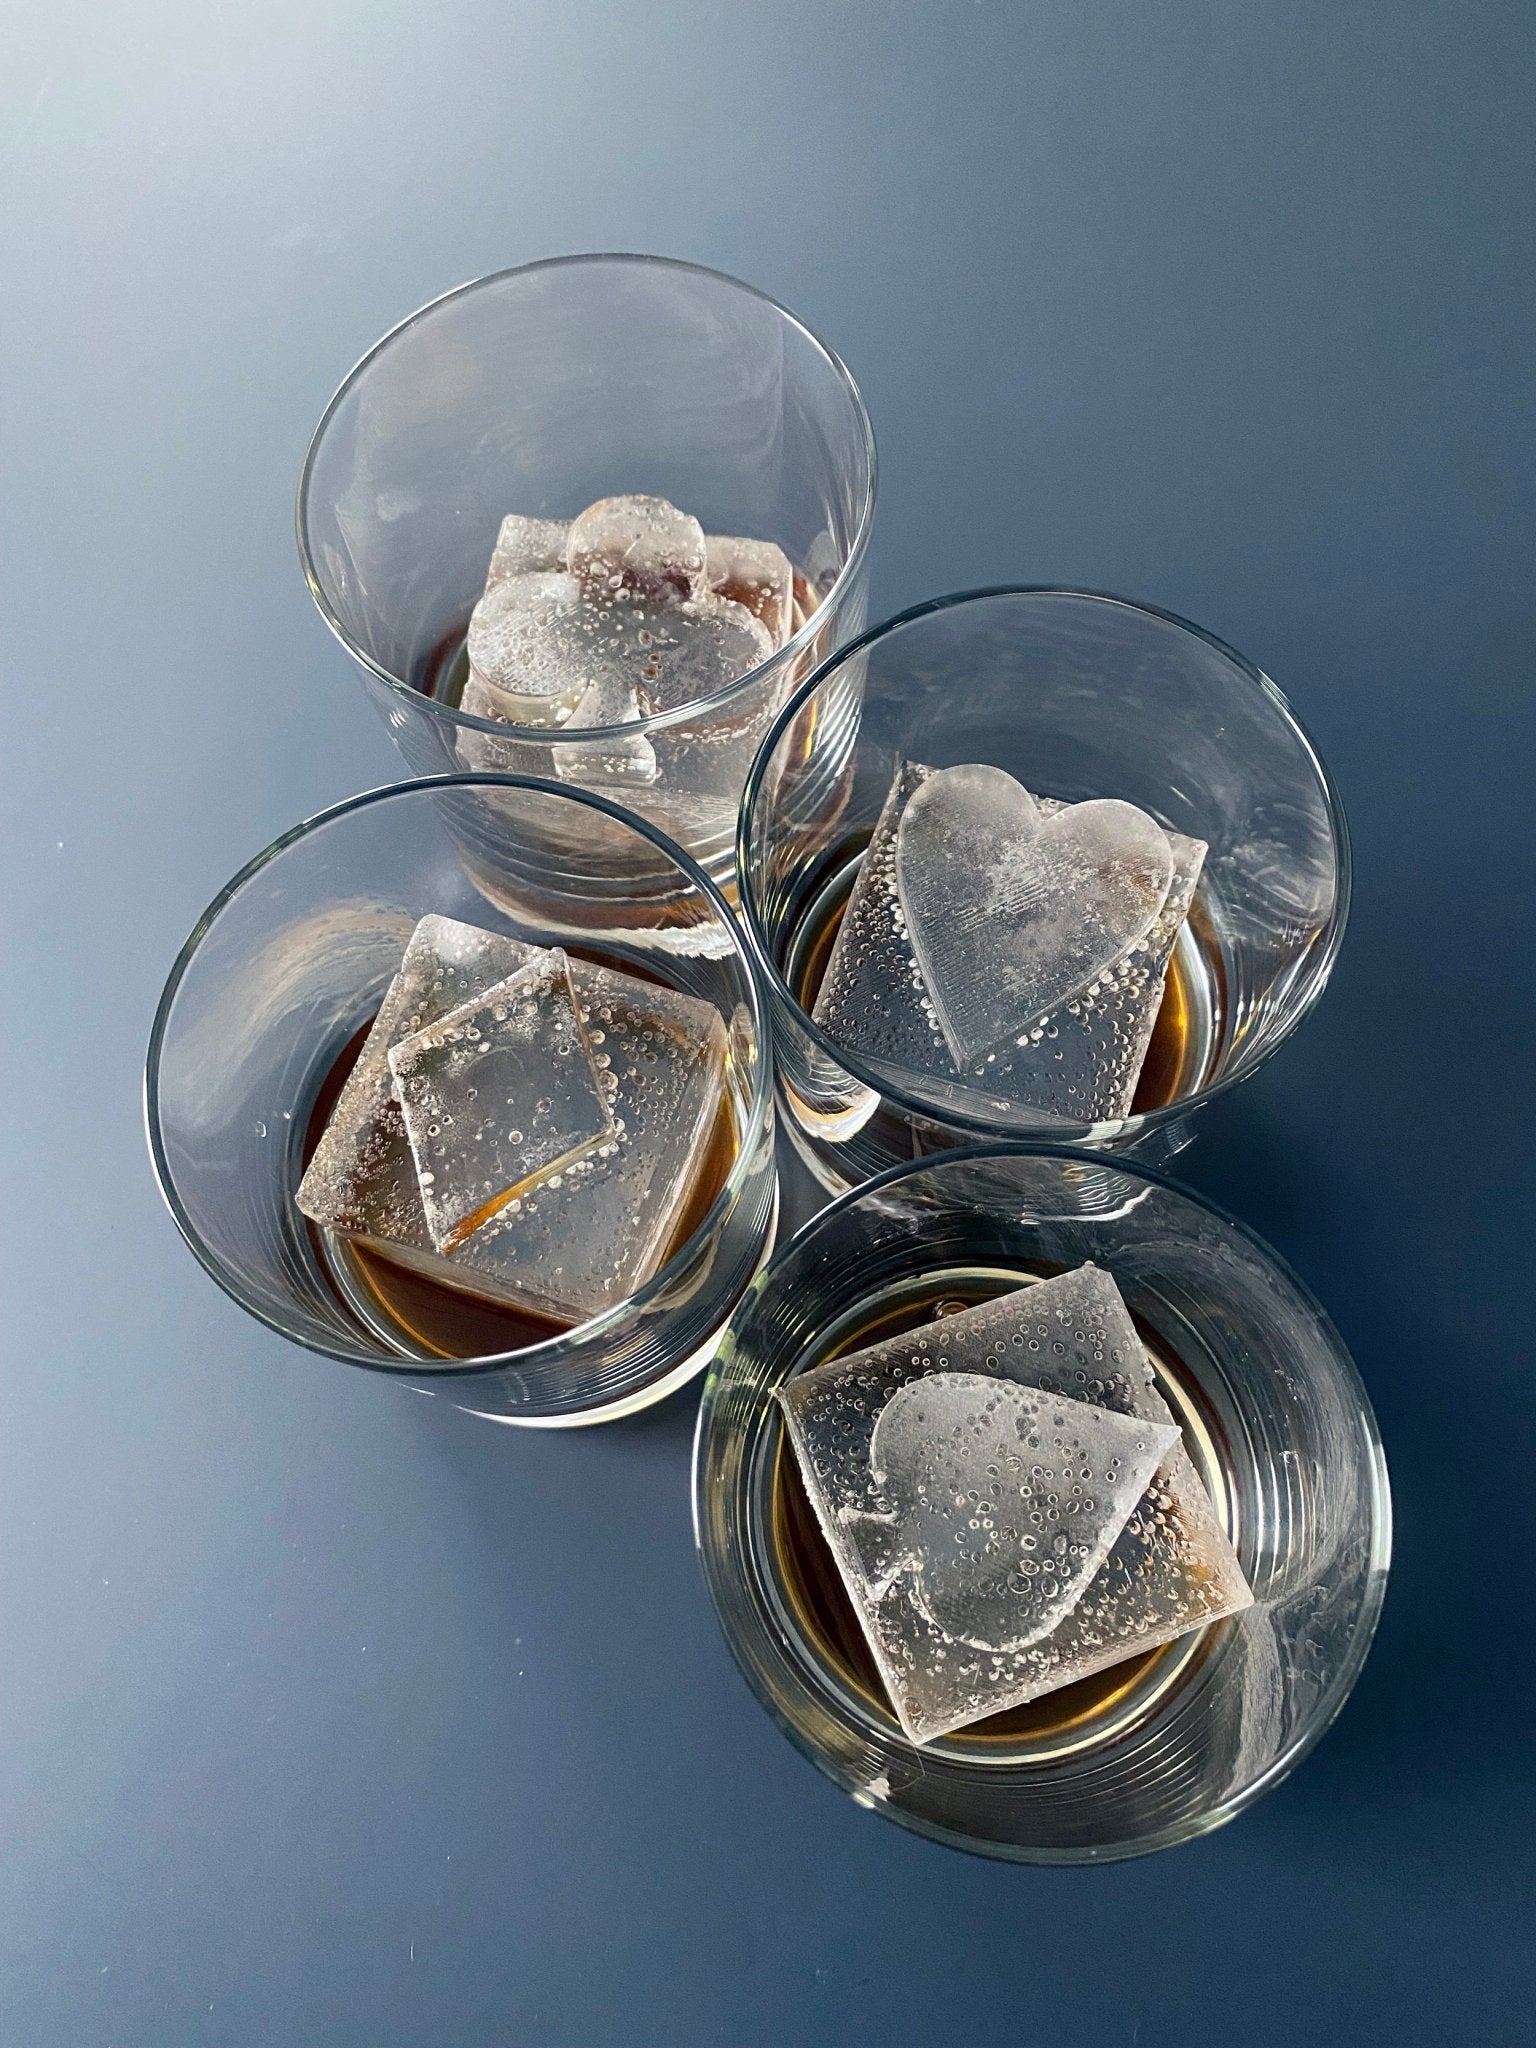 Old Fashioned Ice Cube Tray